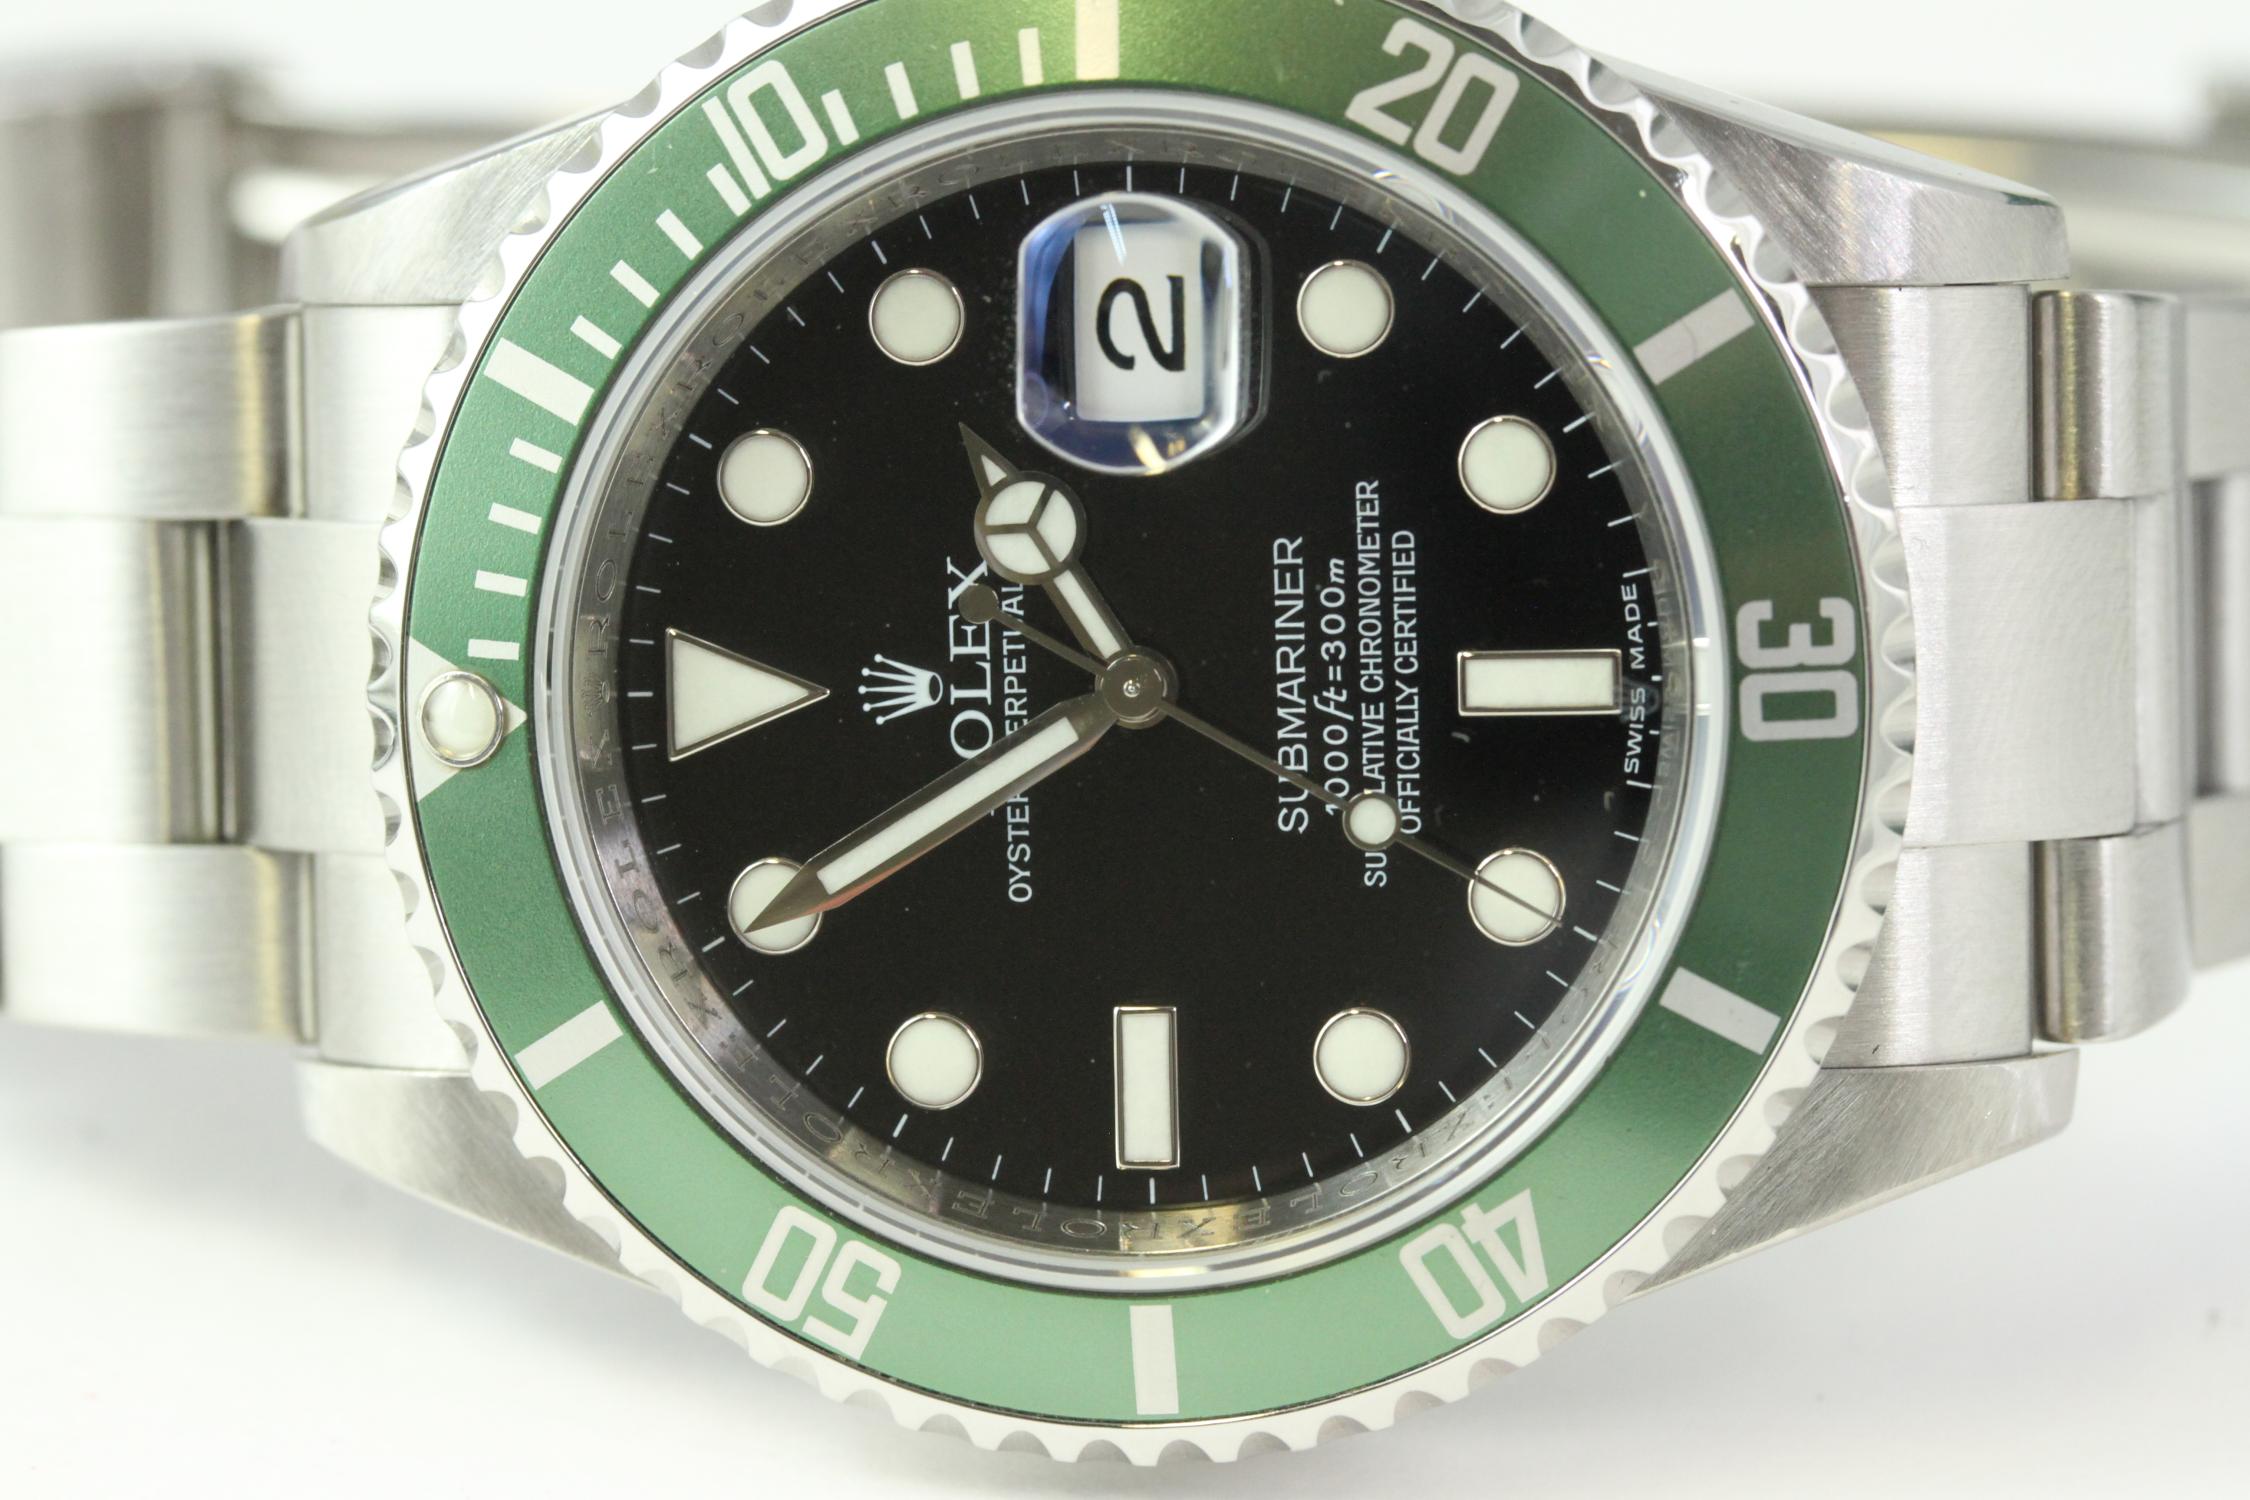 ROLEX SUBMARINER 'KERMIT' 16610LV BOX AND PAPERS 2009 - Image 10 of 10